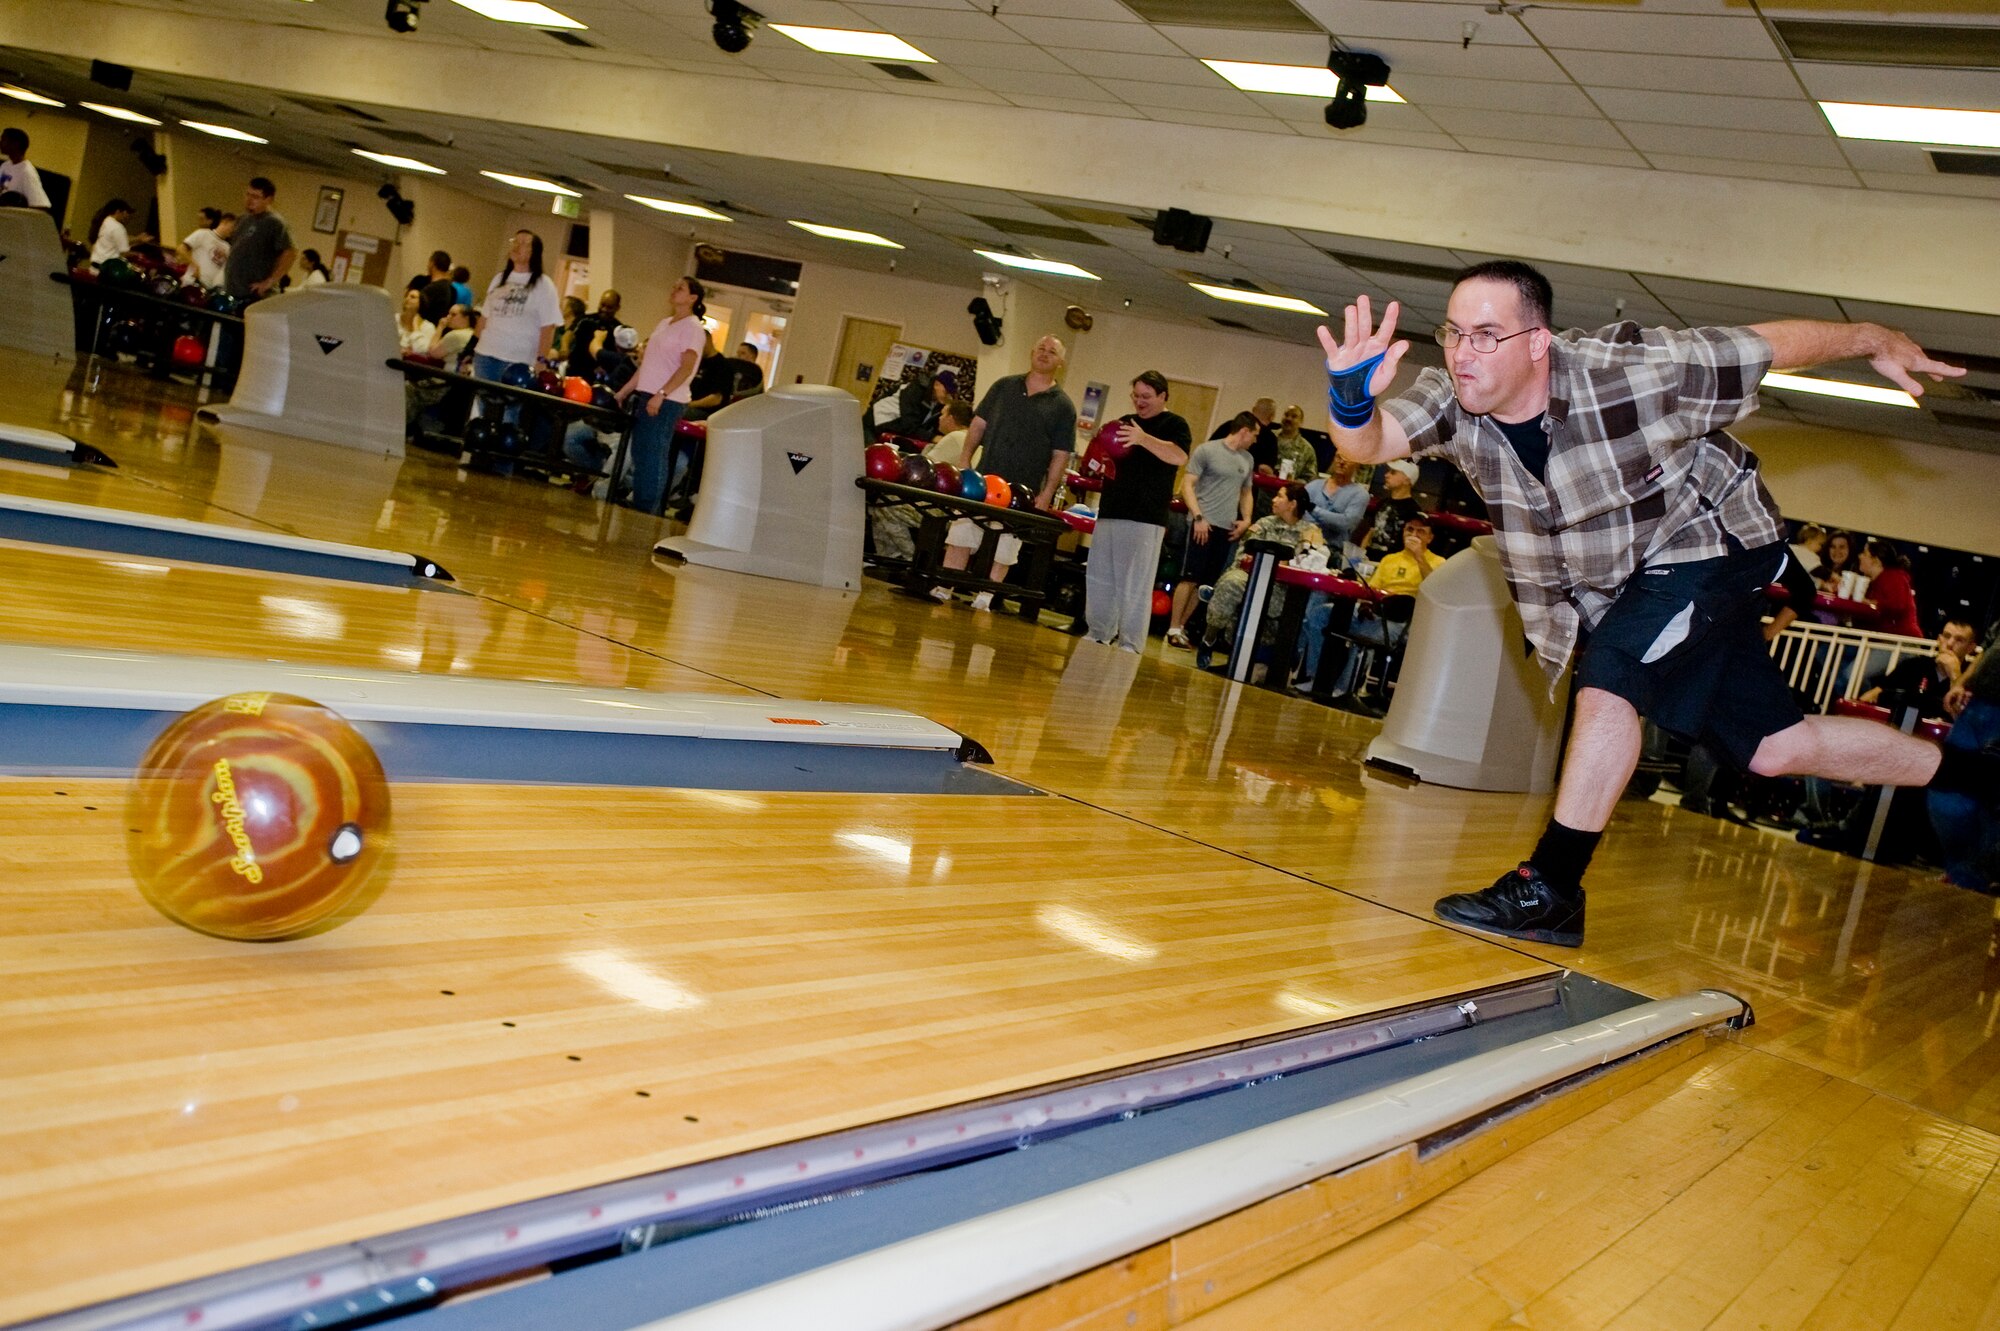 ELMENDORF AIR FORCE BASE, Alaska -- Staff Sgt. Floyd Fowler, 3rd Logistics Readiness Squadron, bowls for a strike during the opening day of the Intramural Bowling League. The league will continue on to early next year and is comprised of teams from squadrons across the base as well as Army units from Fort Richardson. (U.S. Air Force photo/Staff Sgt. Joshua Garcia)